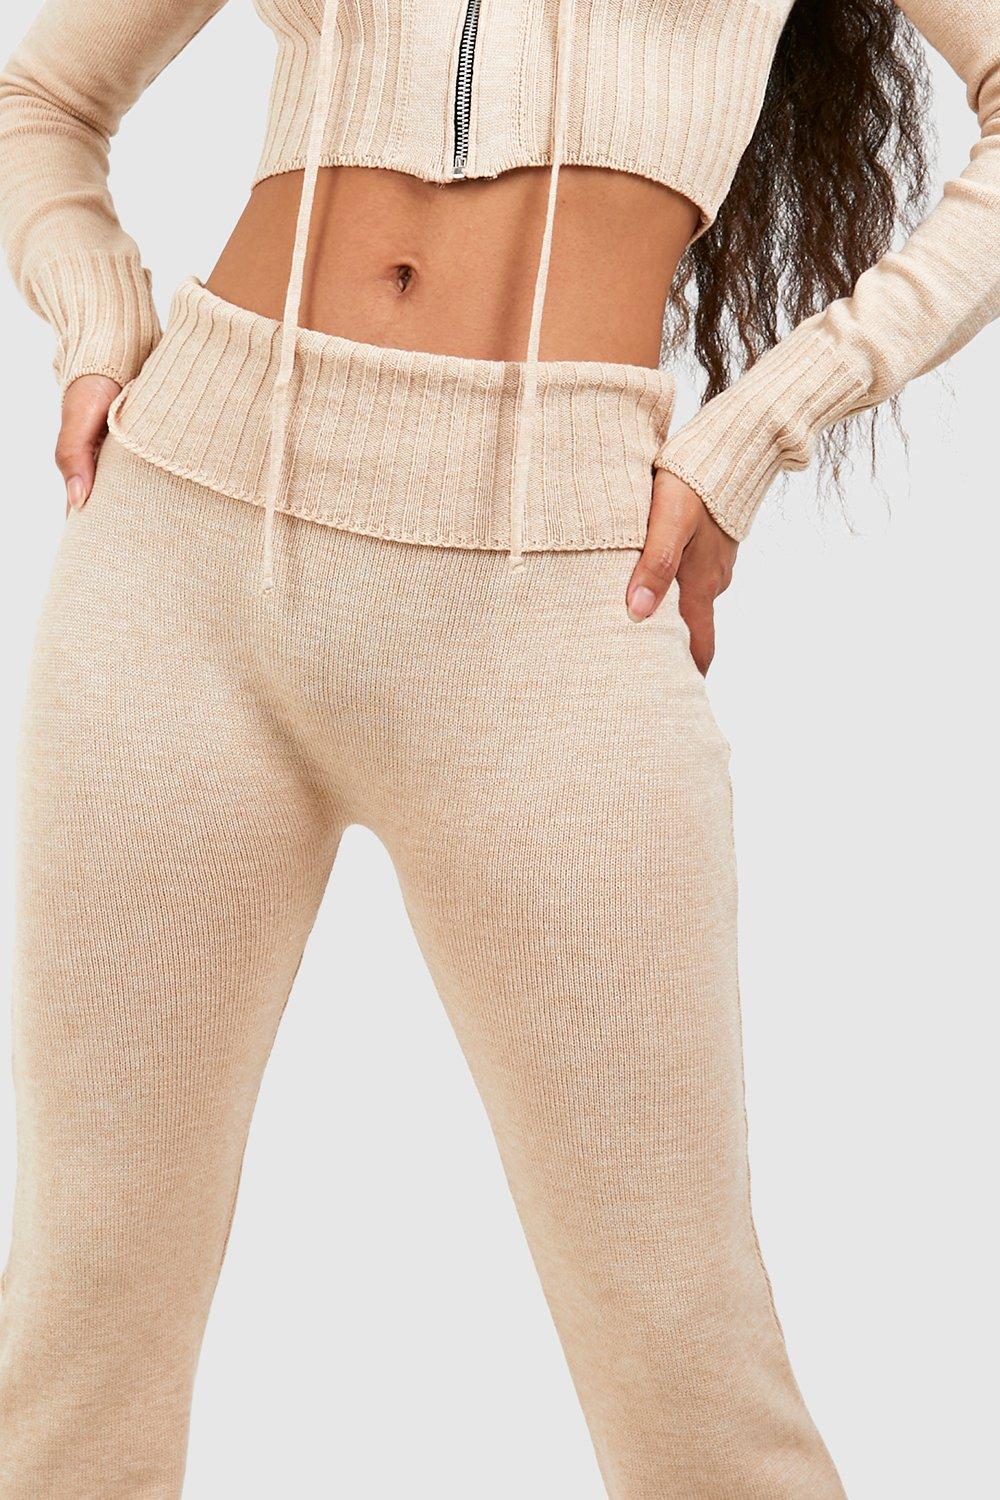 Women's Petite Knitted Fold Over Waist Flares